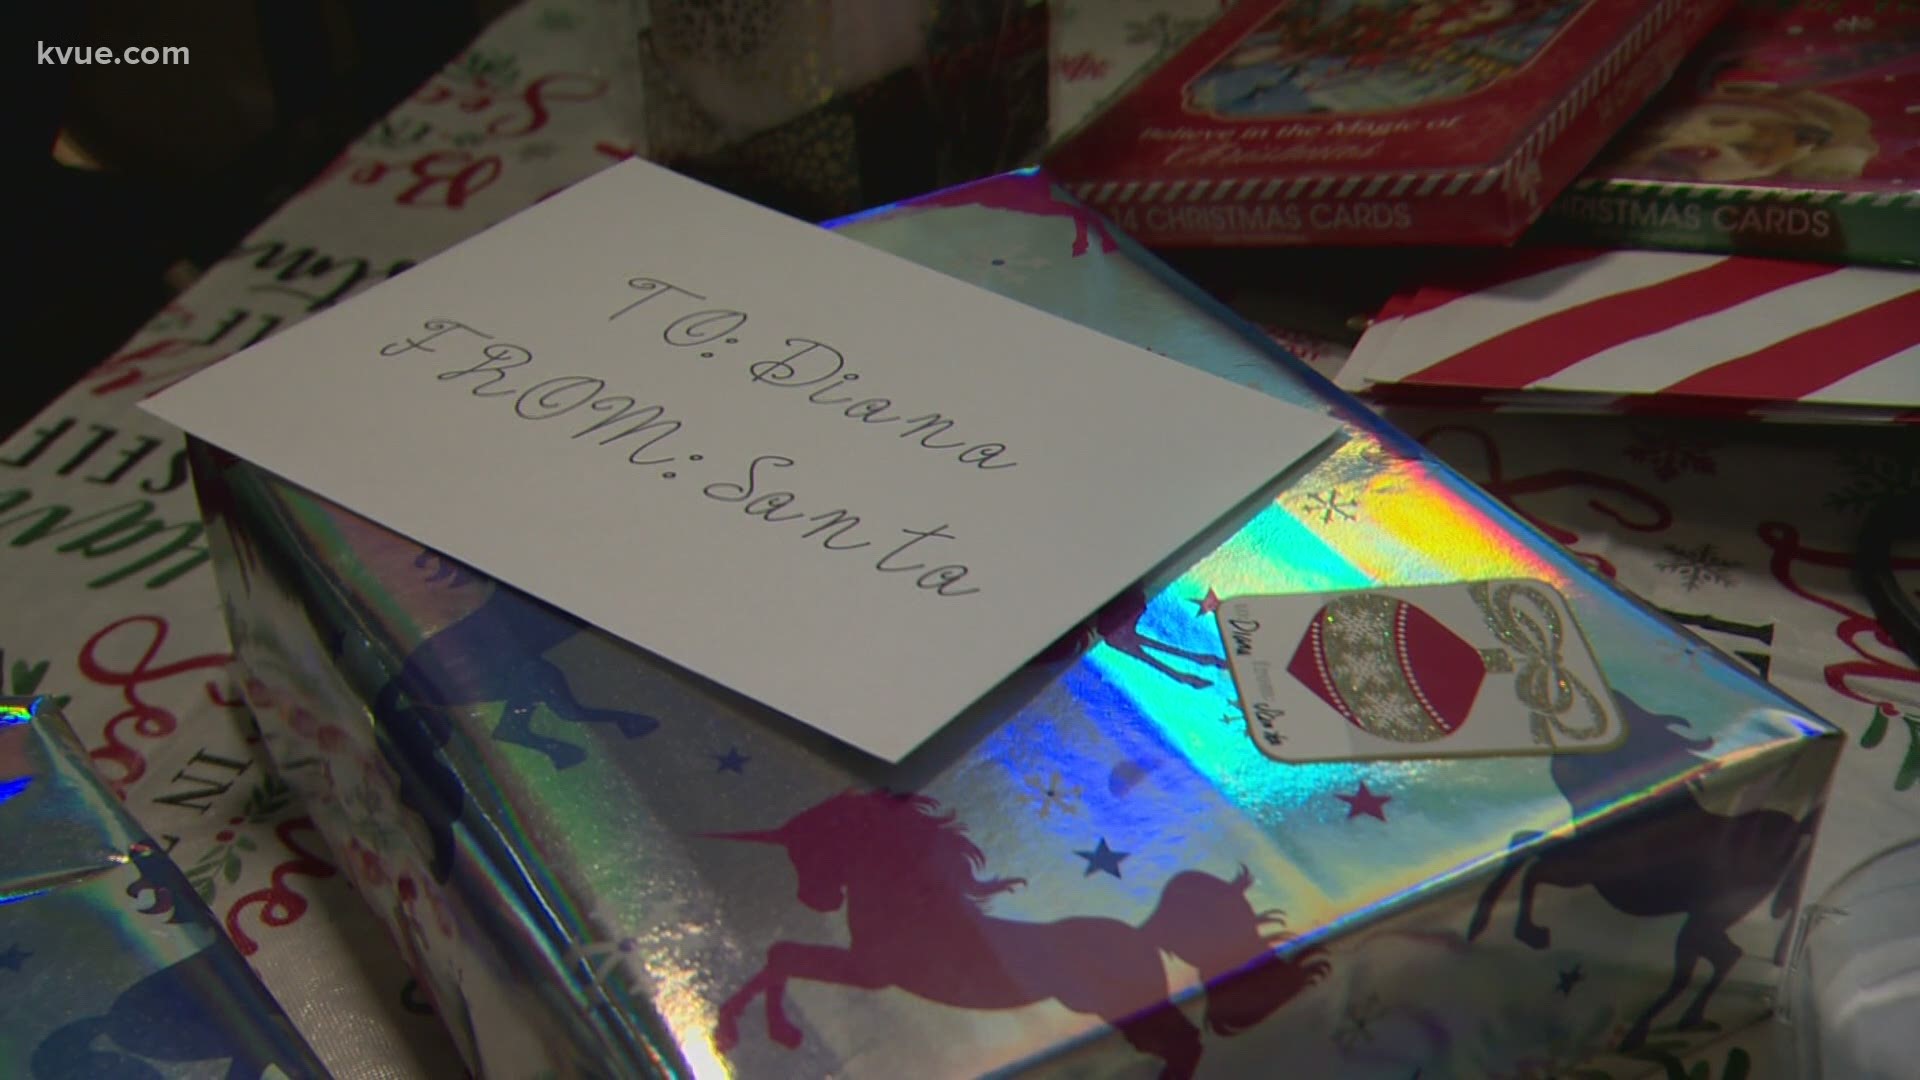 Manor children are receiving letters from Santa, as kids scramble to get their wish lists to the North Pole.